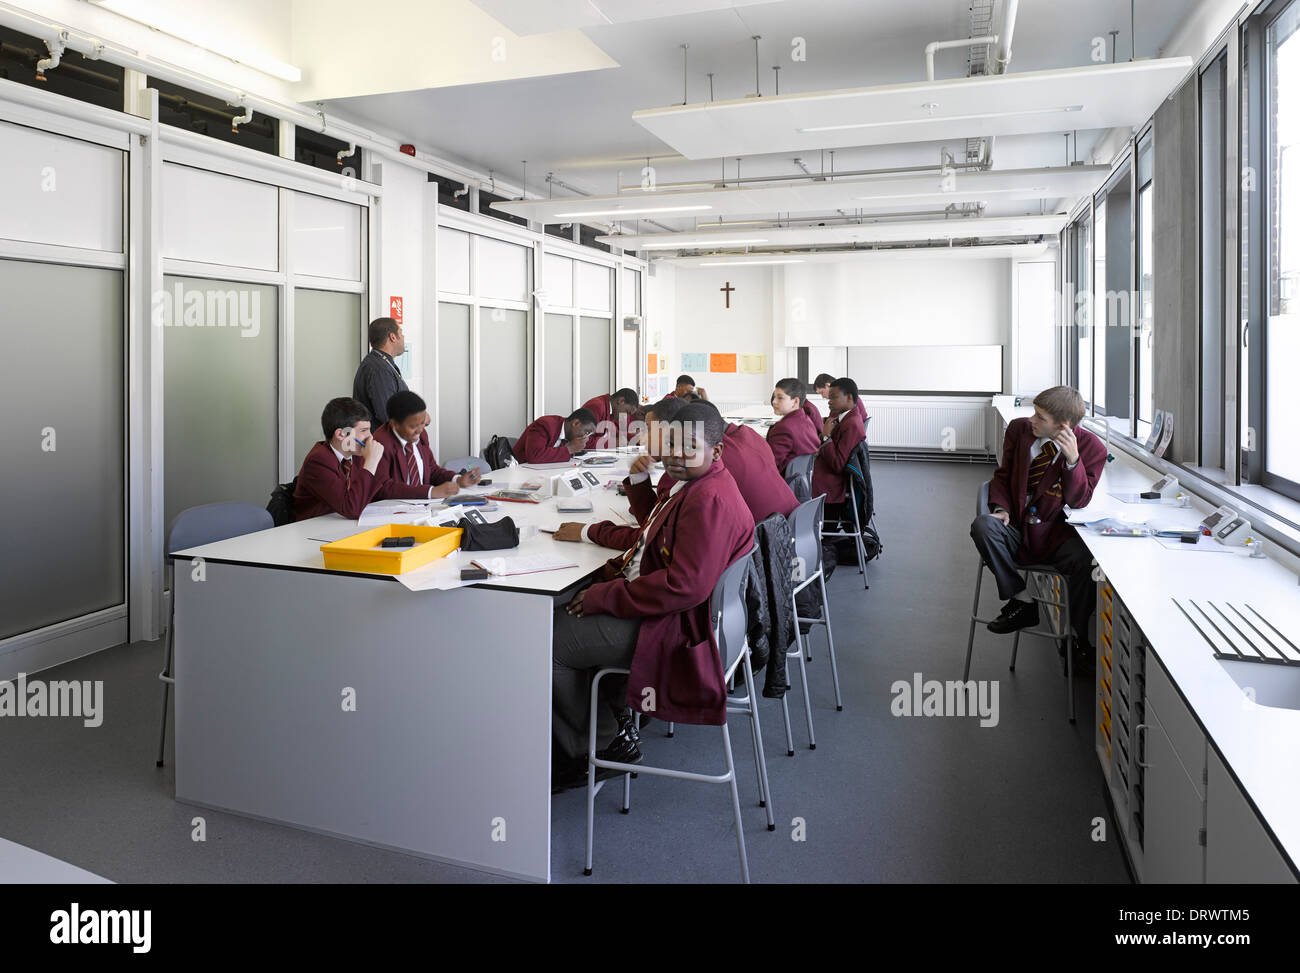 St Thomas the Apostle College, London, United Kingdom. Architect: Allies and Morrison, 2013. Science lab classroom. Stock Photo